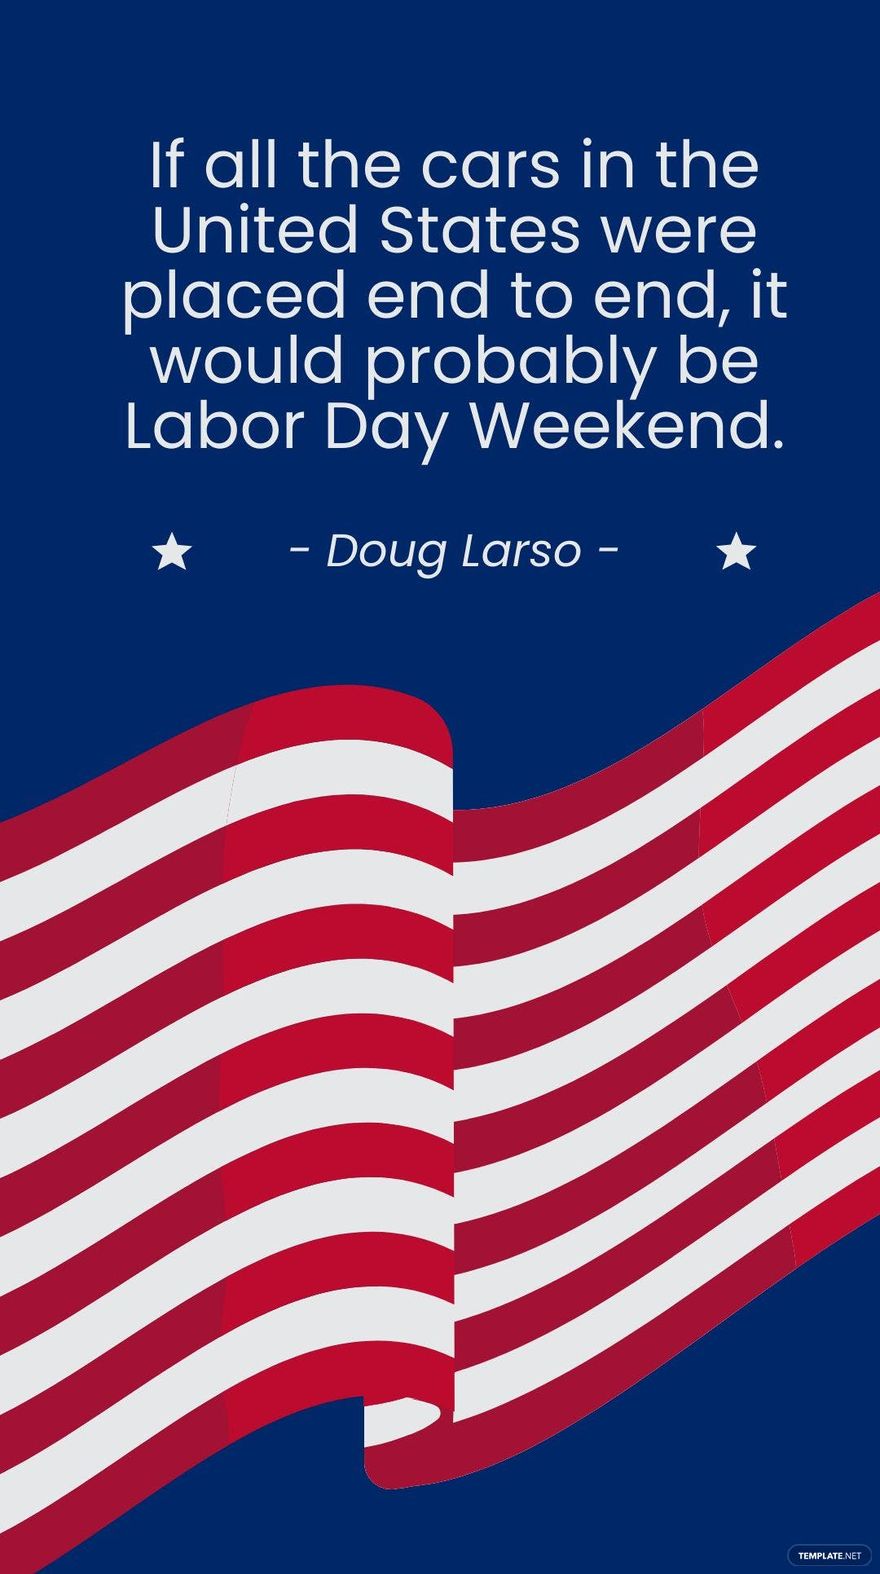 Doug Larso - If all the cars in the United States were placed end to end, it would probably be Labor Day Weekend.